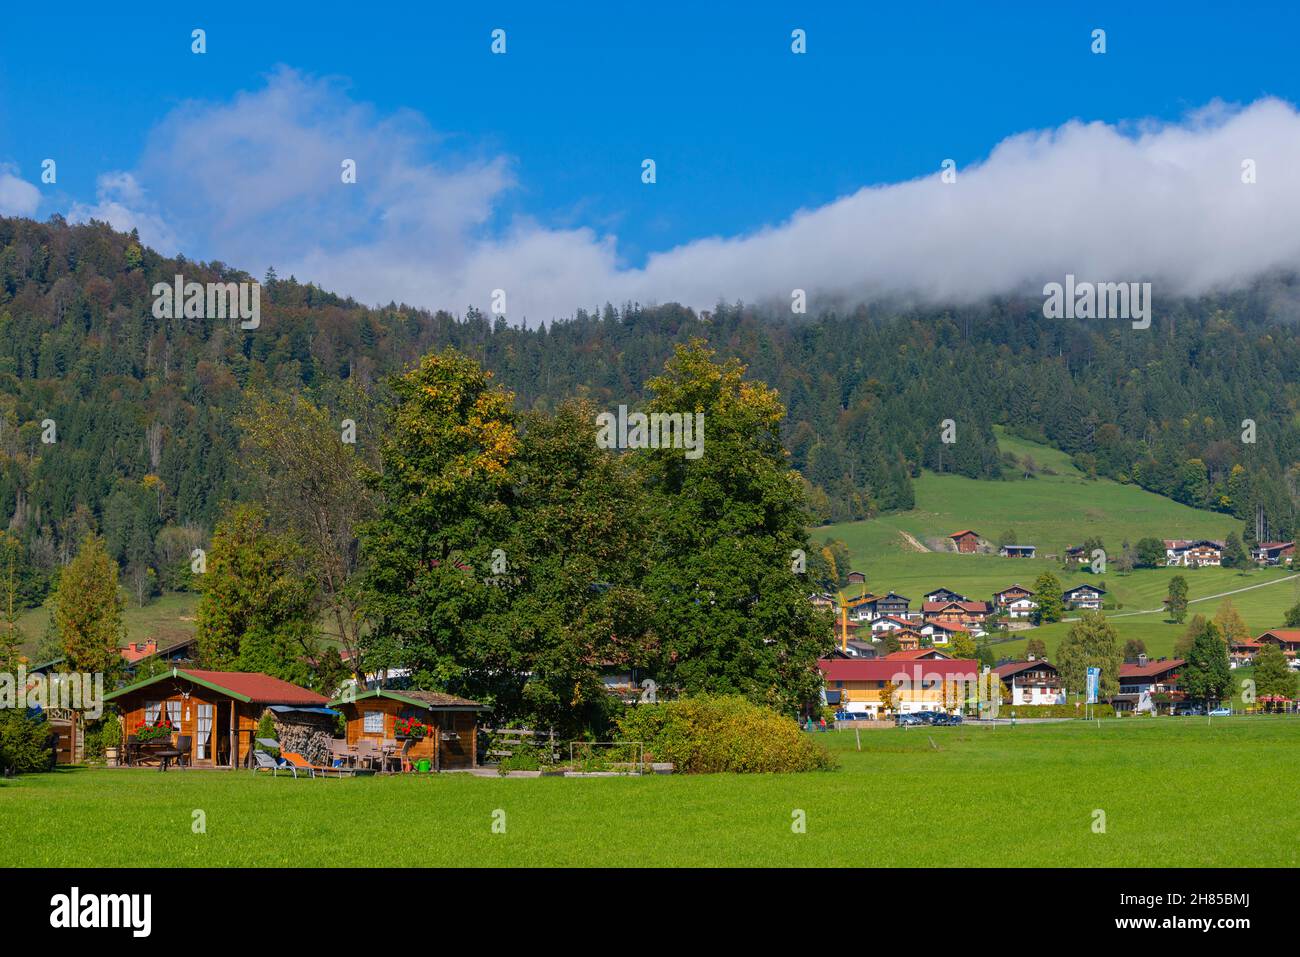 Maedows and pastures in the outskirts of Reit village, Reit im Winkle, Chiemgau region, Upper Bavaria, Southern Germany, Europe Stock Photo